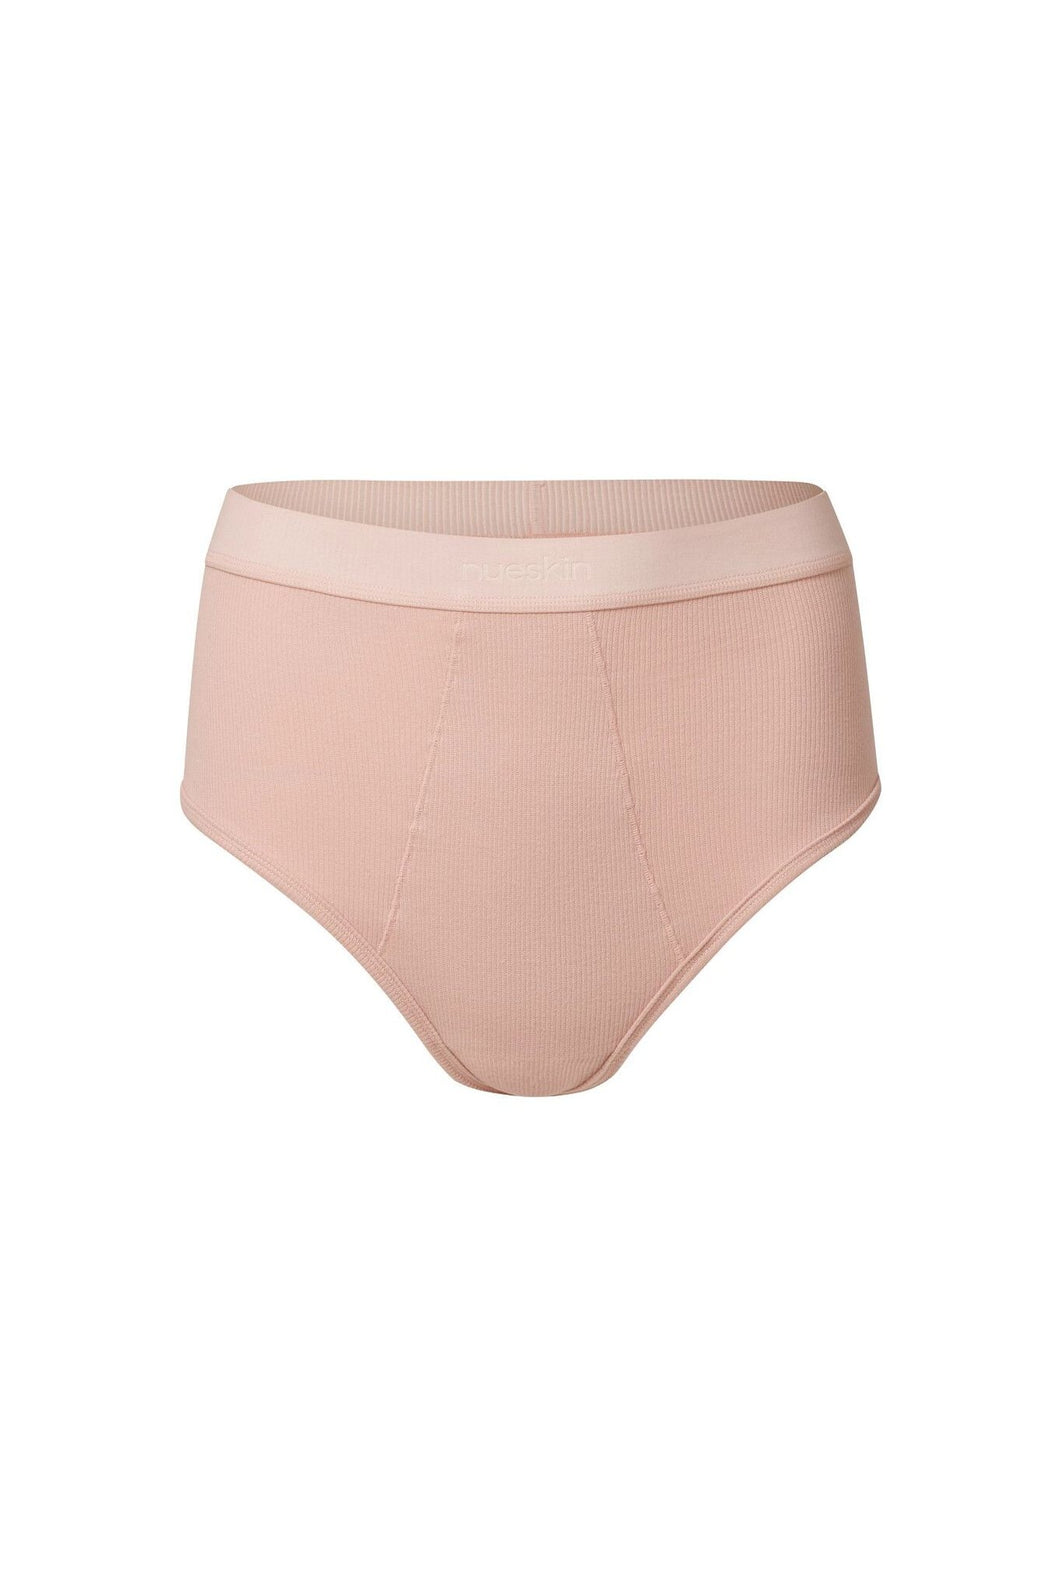 nueskin Gracee Rib Cotton High-Rise Cheeky Brief in color Rose Cloud and shape midi brief